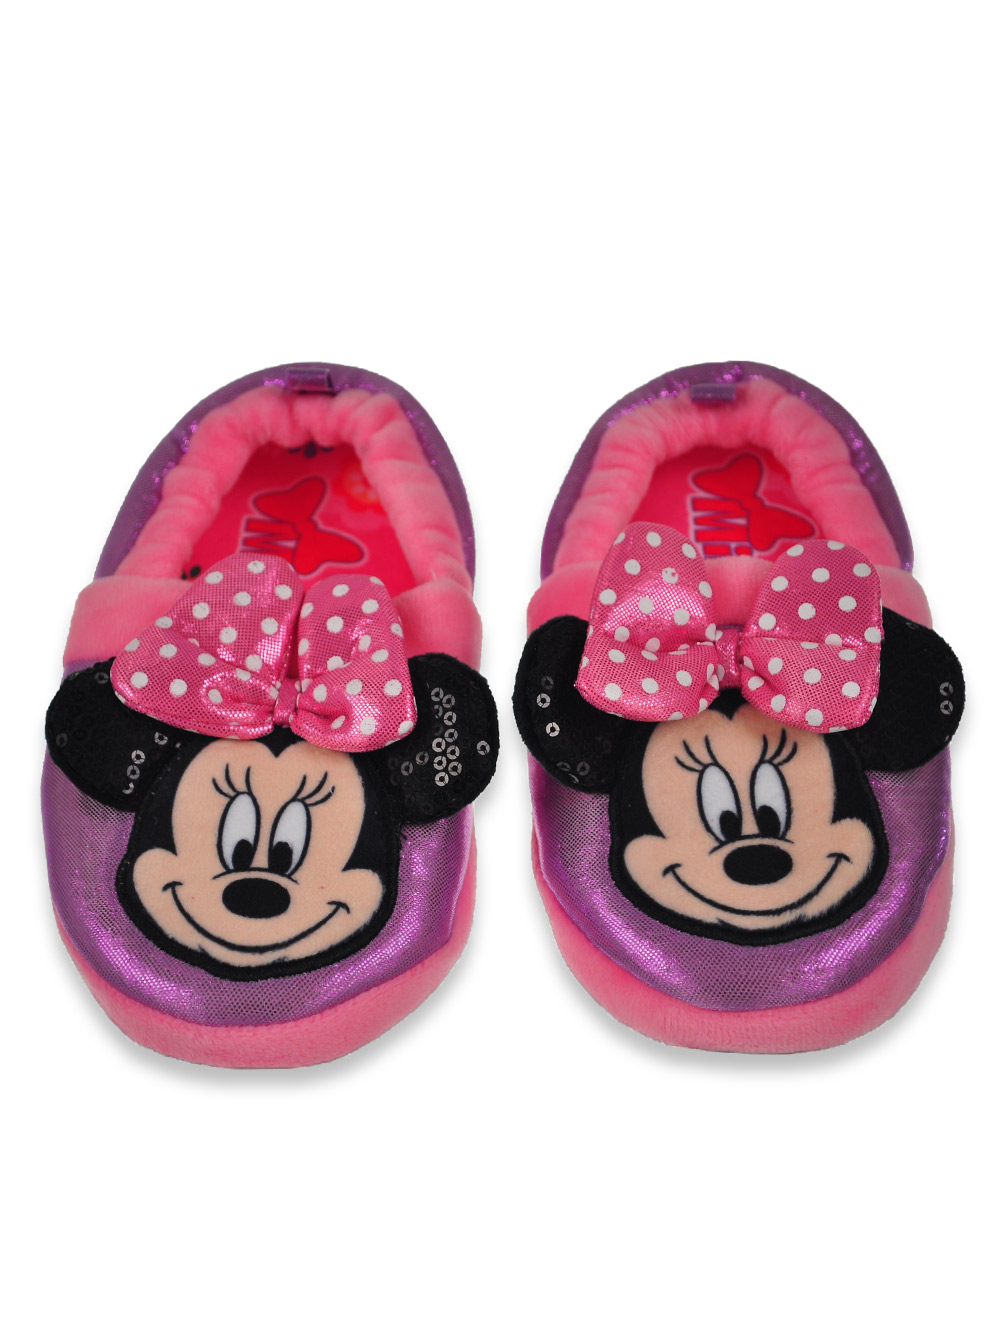 disney minnie mouse slippers